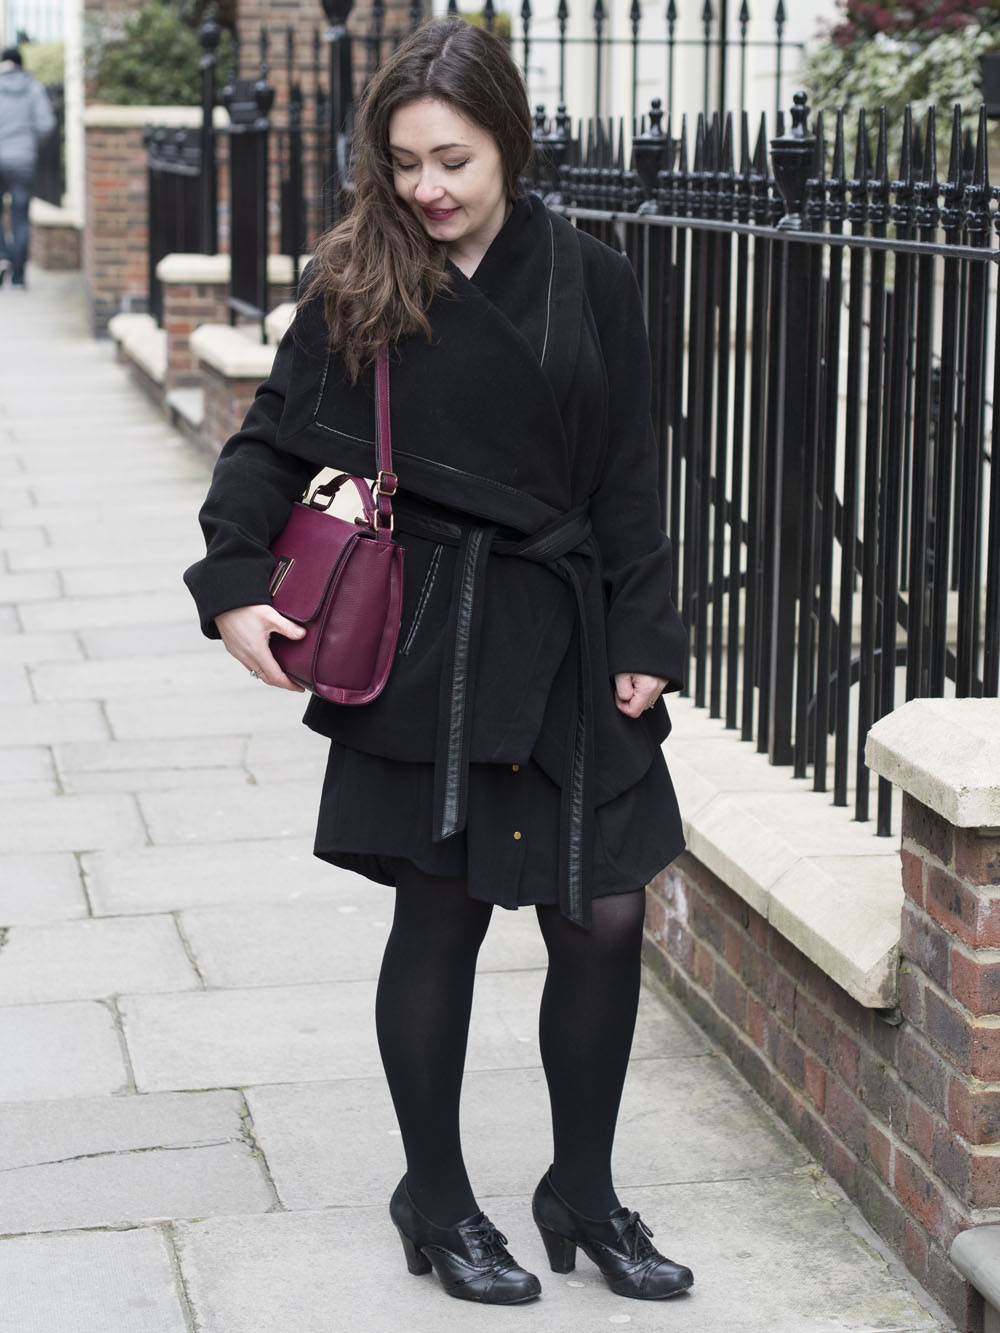 OOTD | Dressing For A Day Out In London